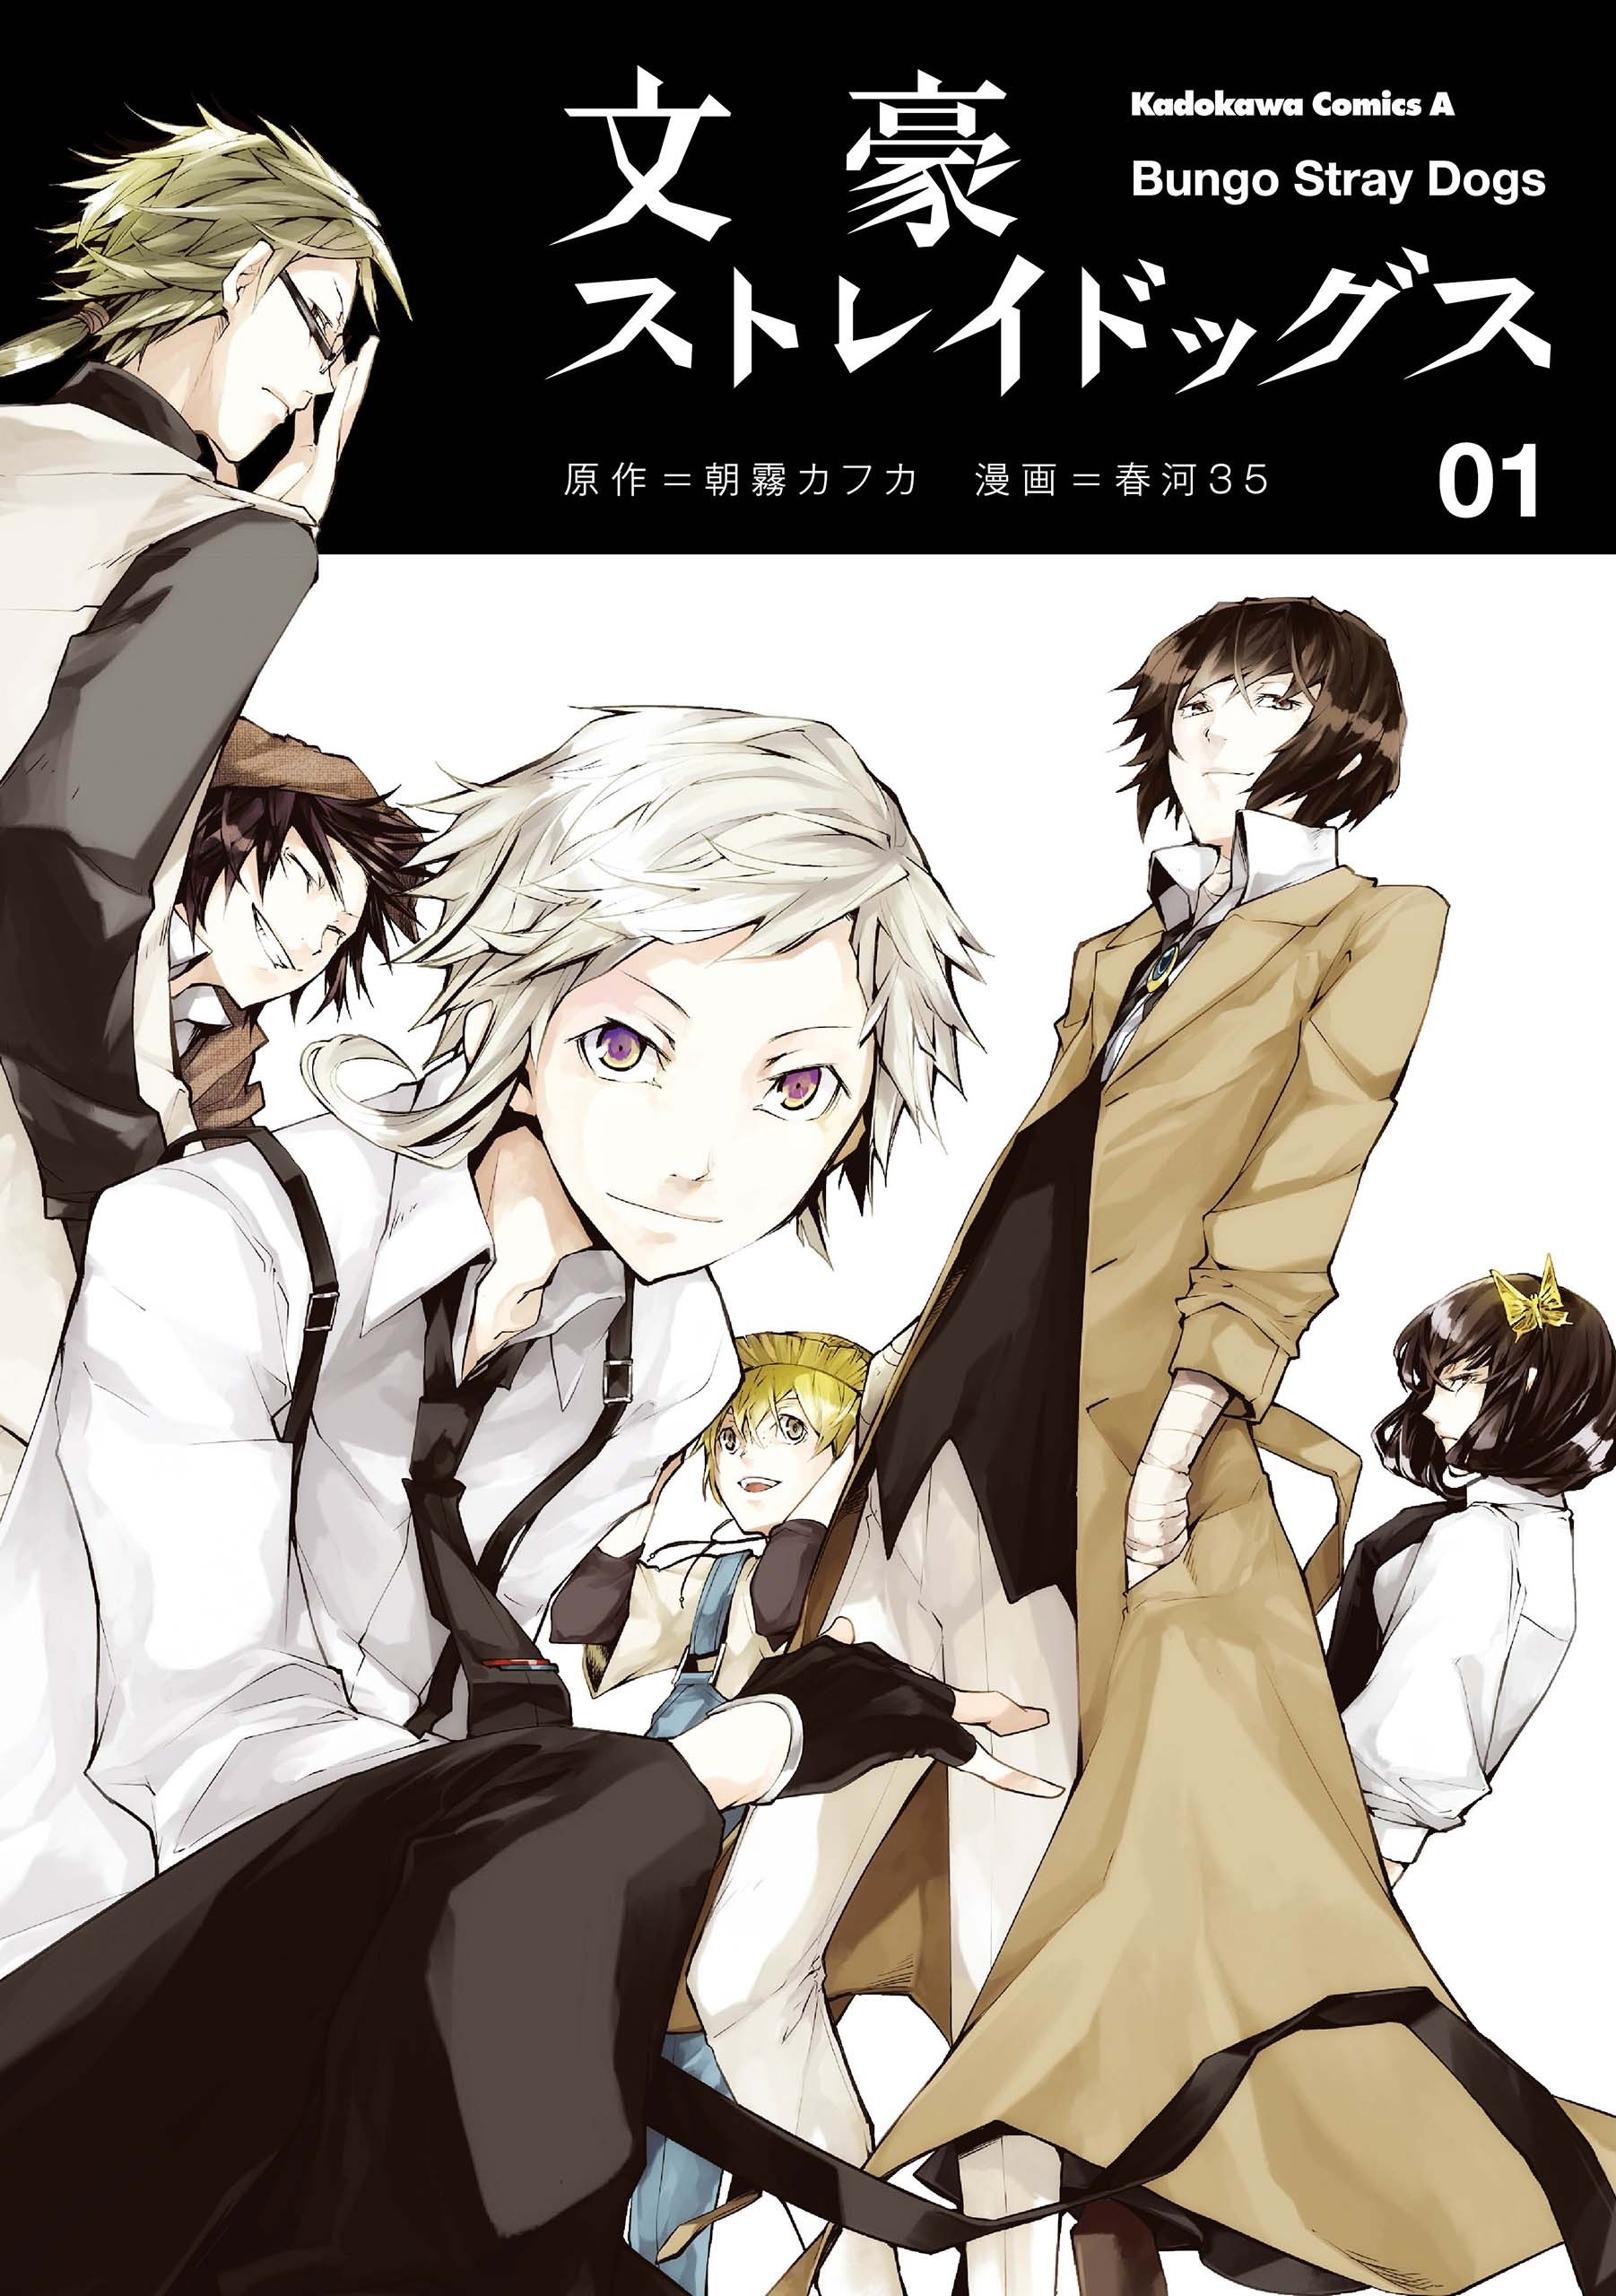 Chapter 51, Bungo Stray Dogs Wiki